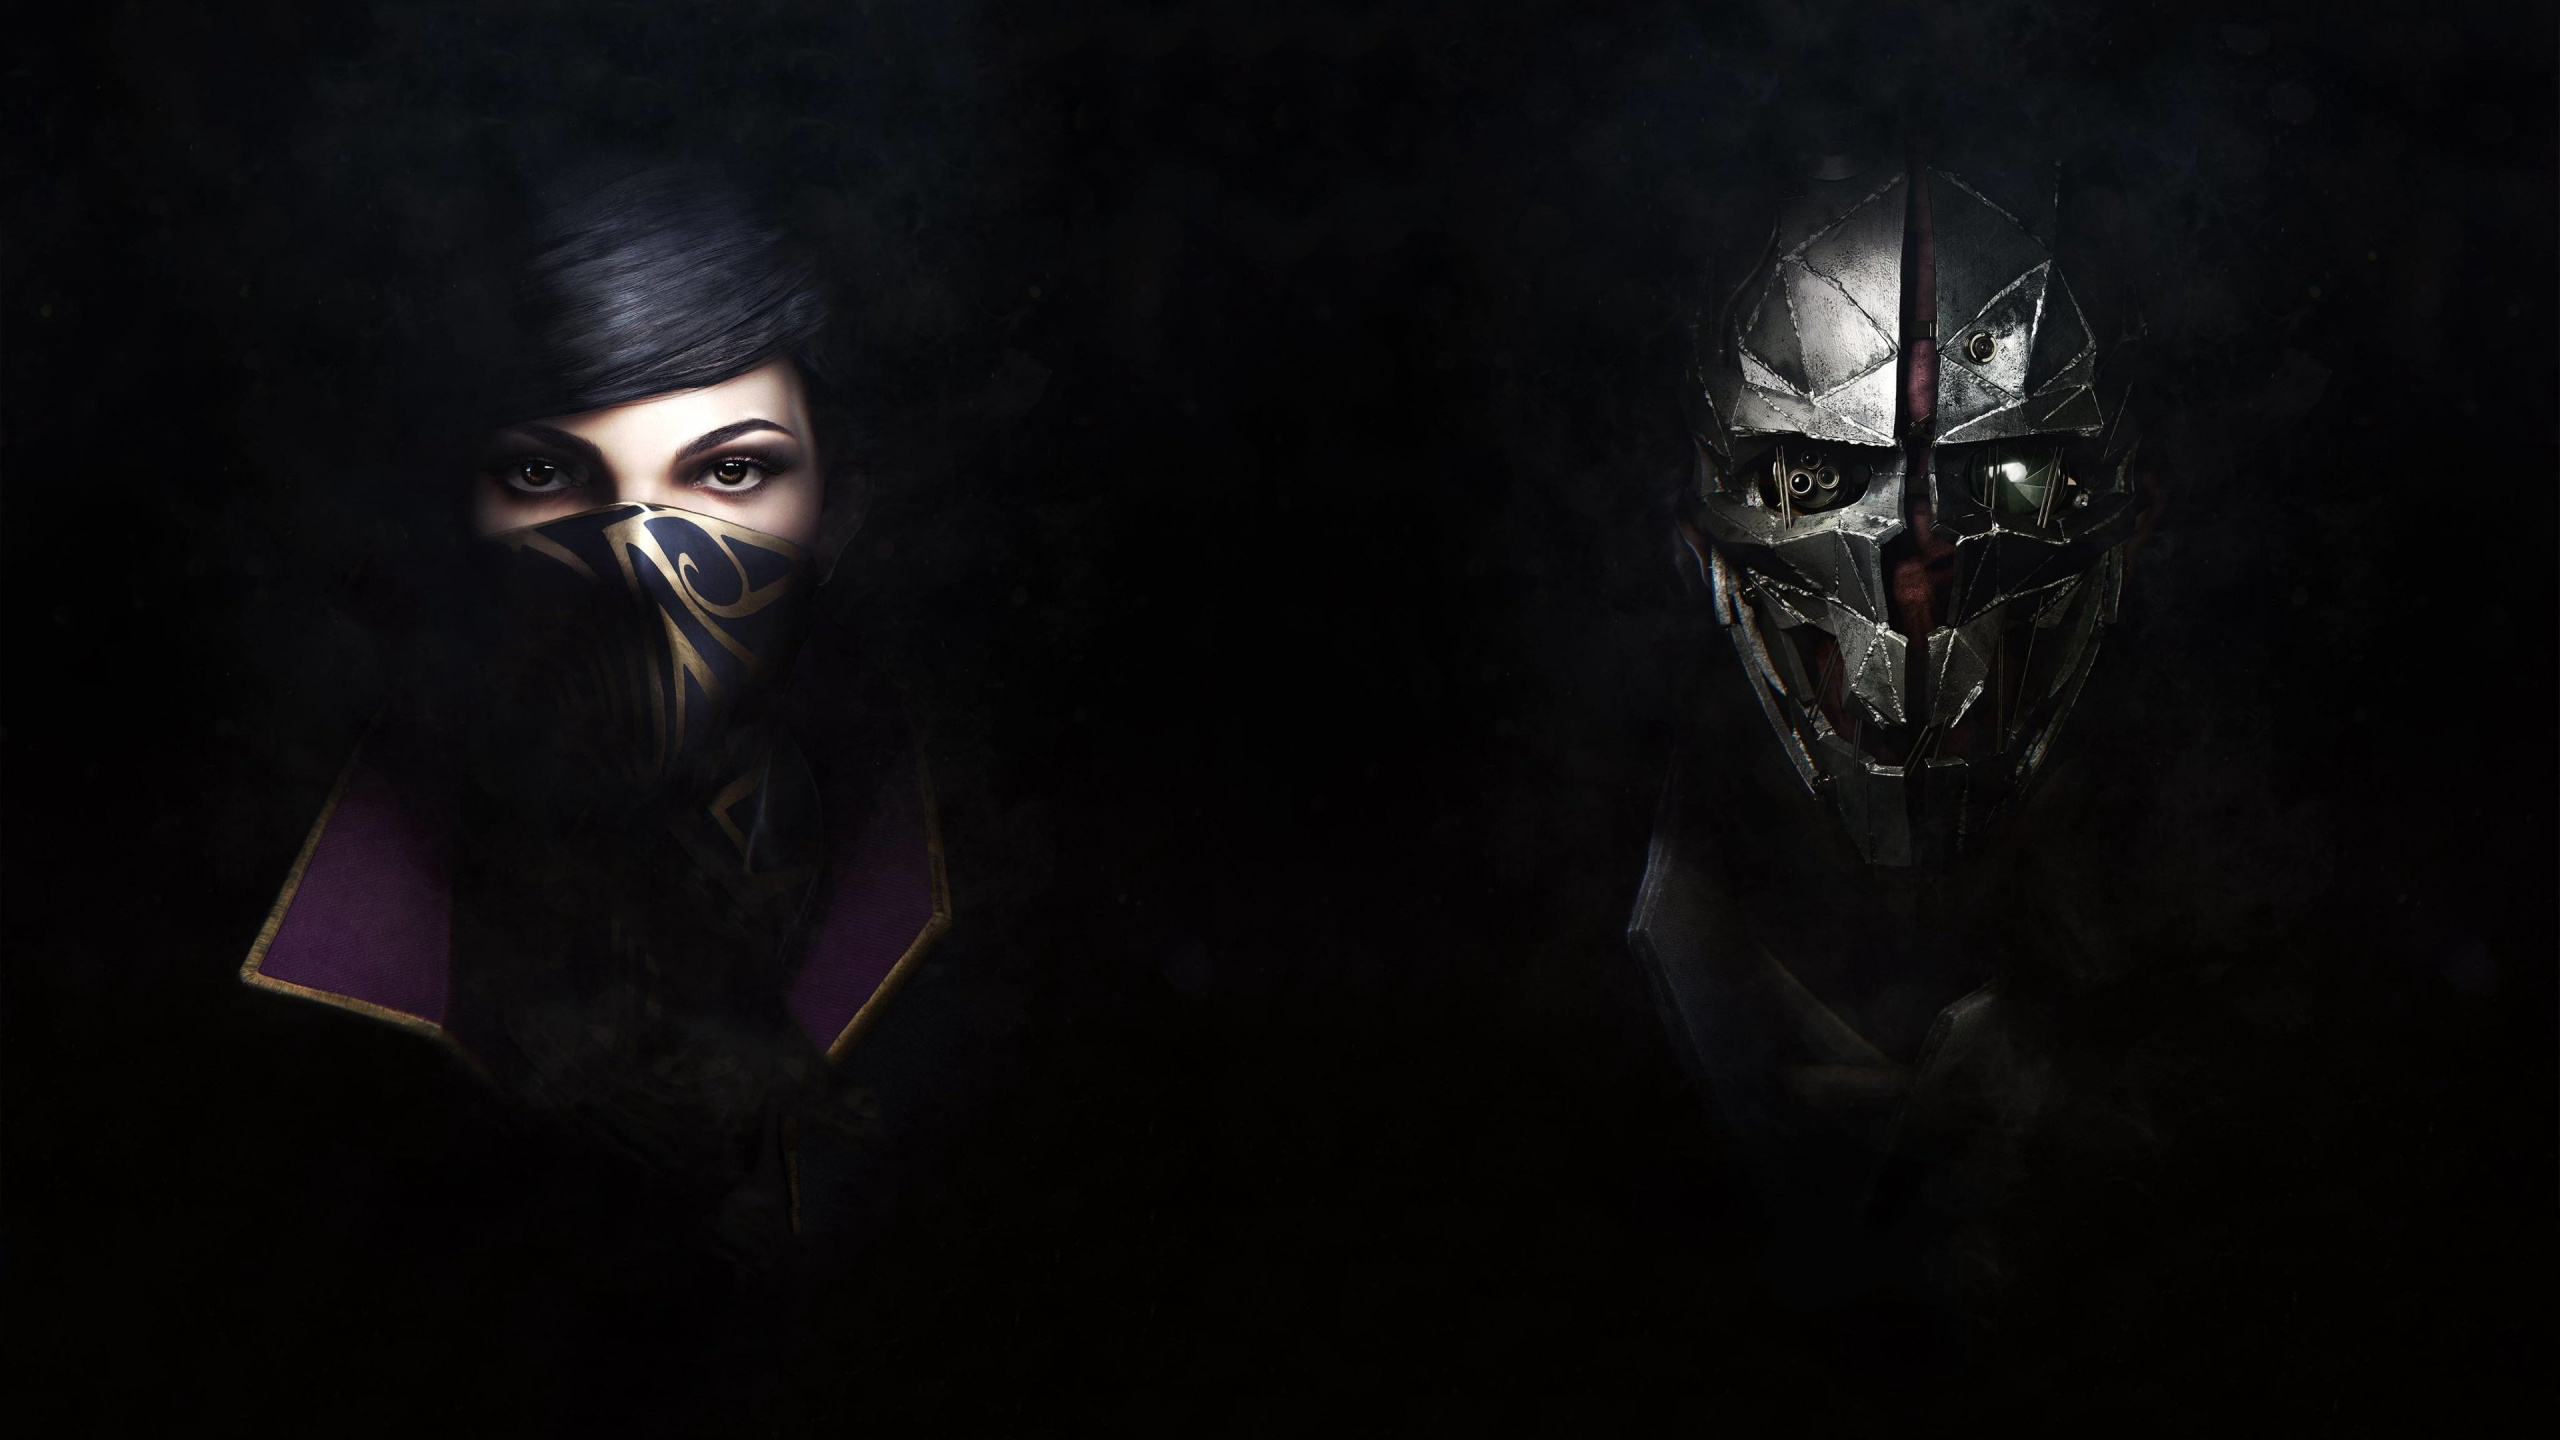 Dishonored 2, Déshonoré, Bethesda Softworks, Jeu D'infiltration, Obscurité. Wallpaper in 2560x1440 Resolution